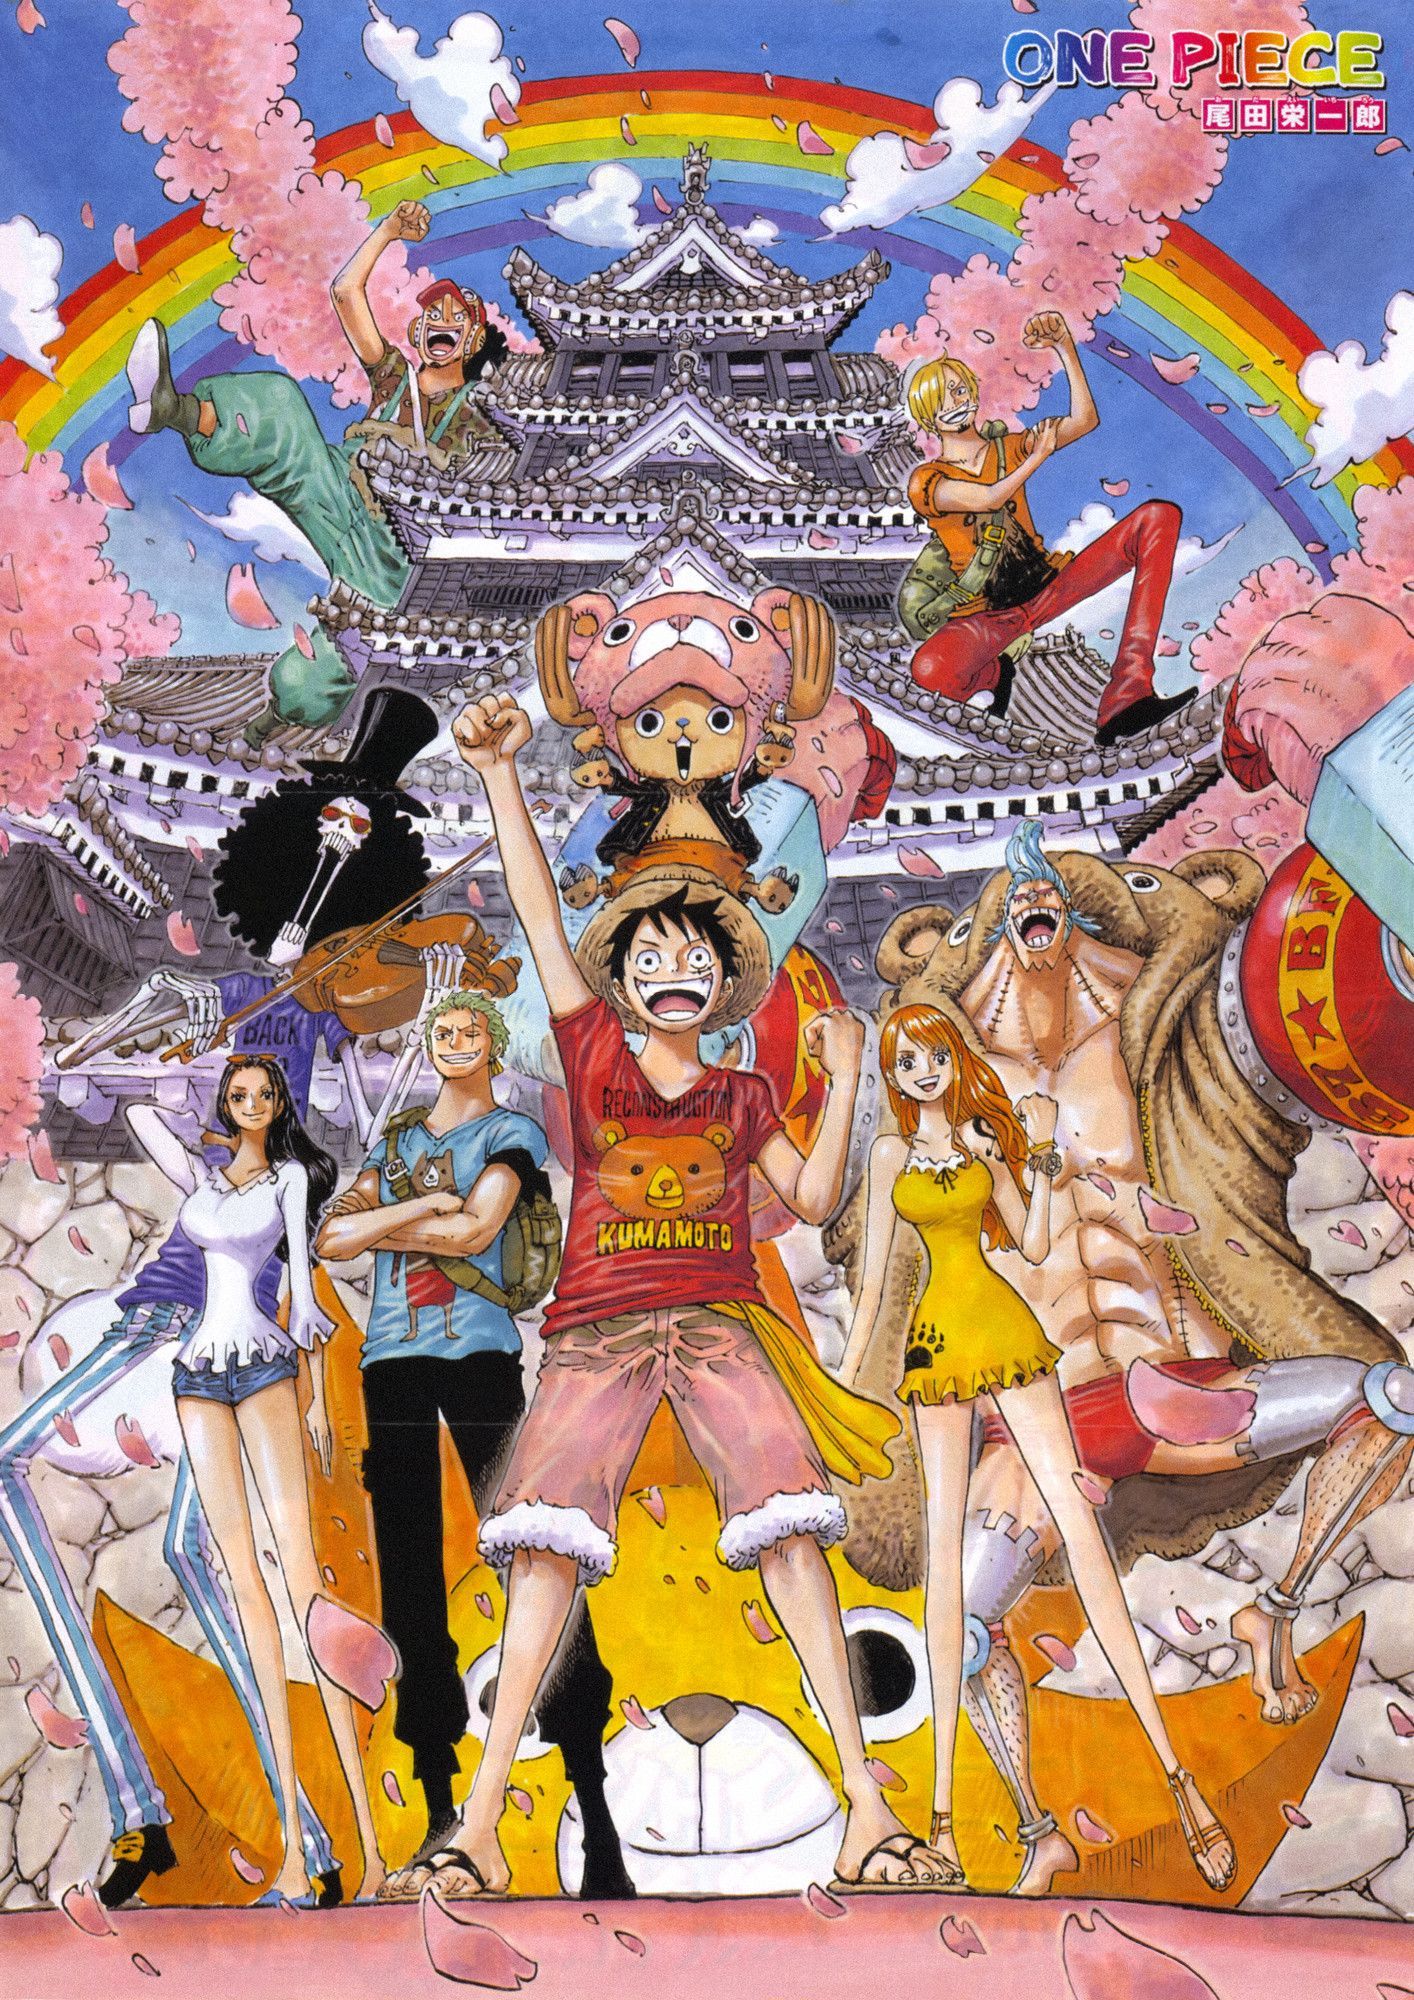 One Piece Manga Wallpapers - Wallpaper Cave